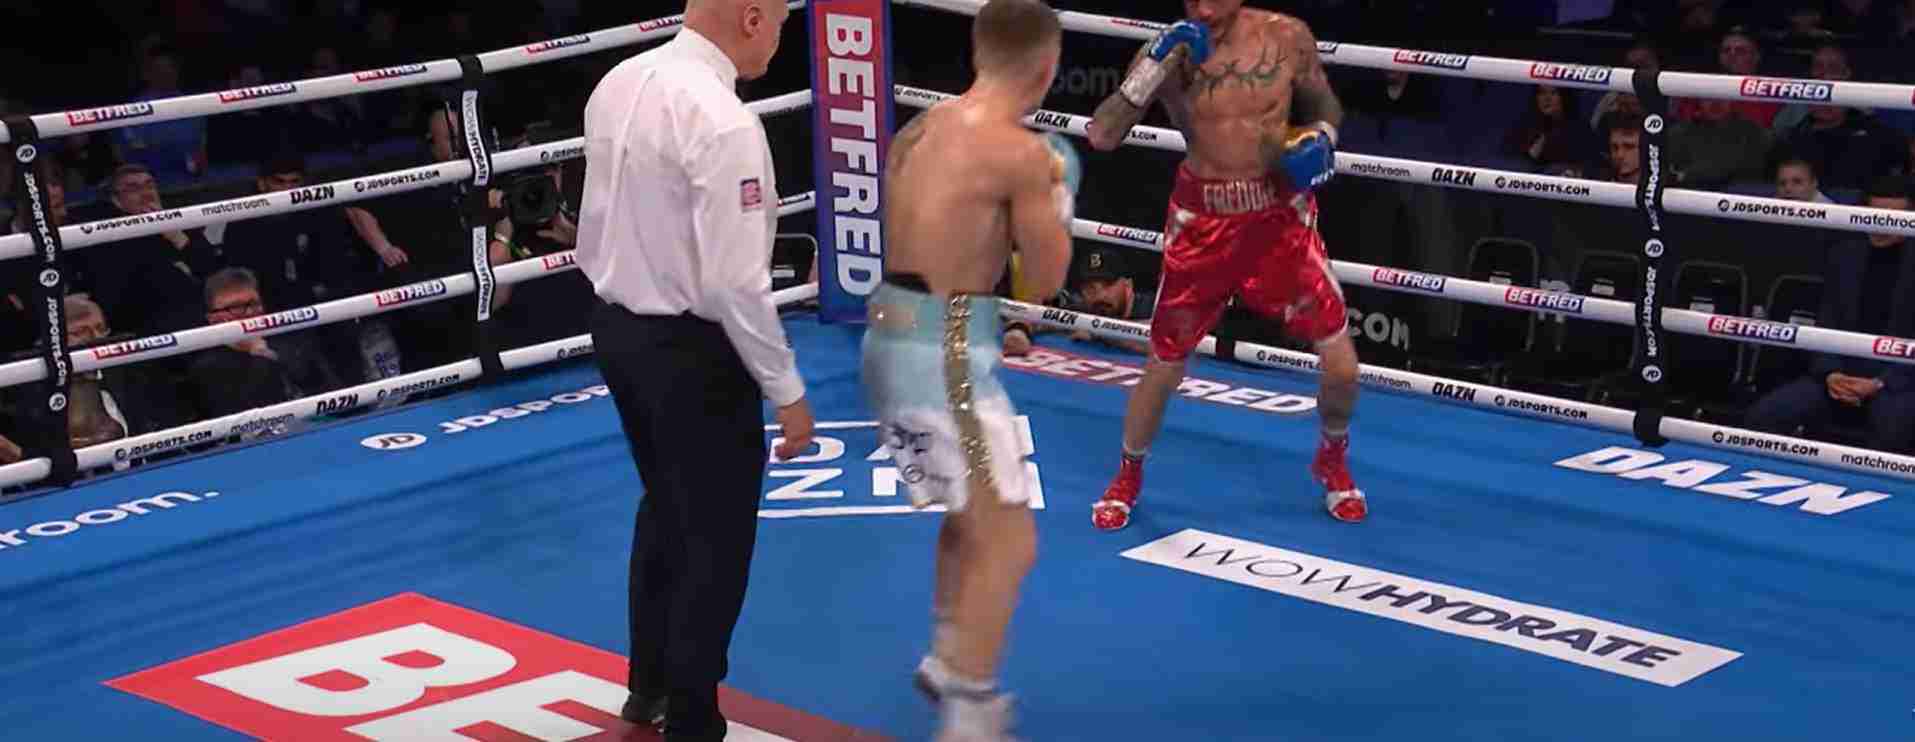 Son of boxing legend goes 6-0 in round 6 stoppage